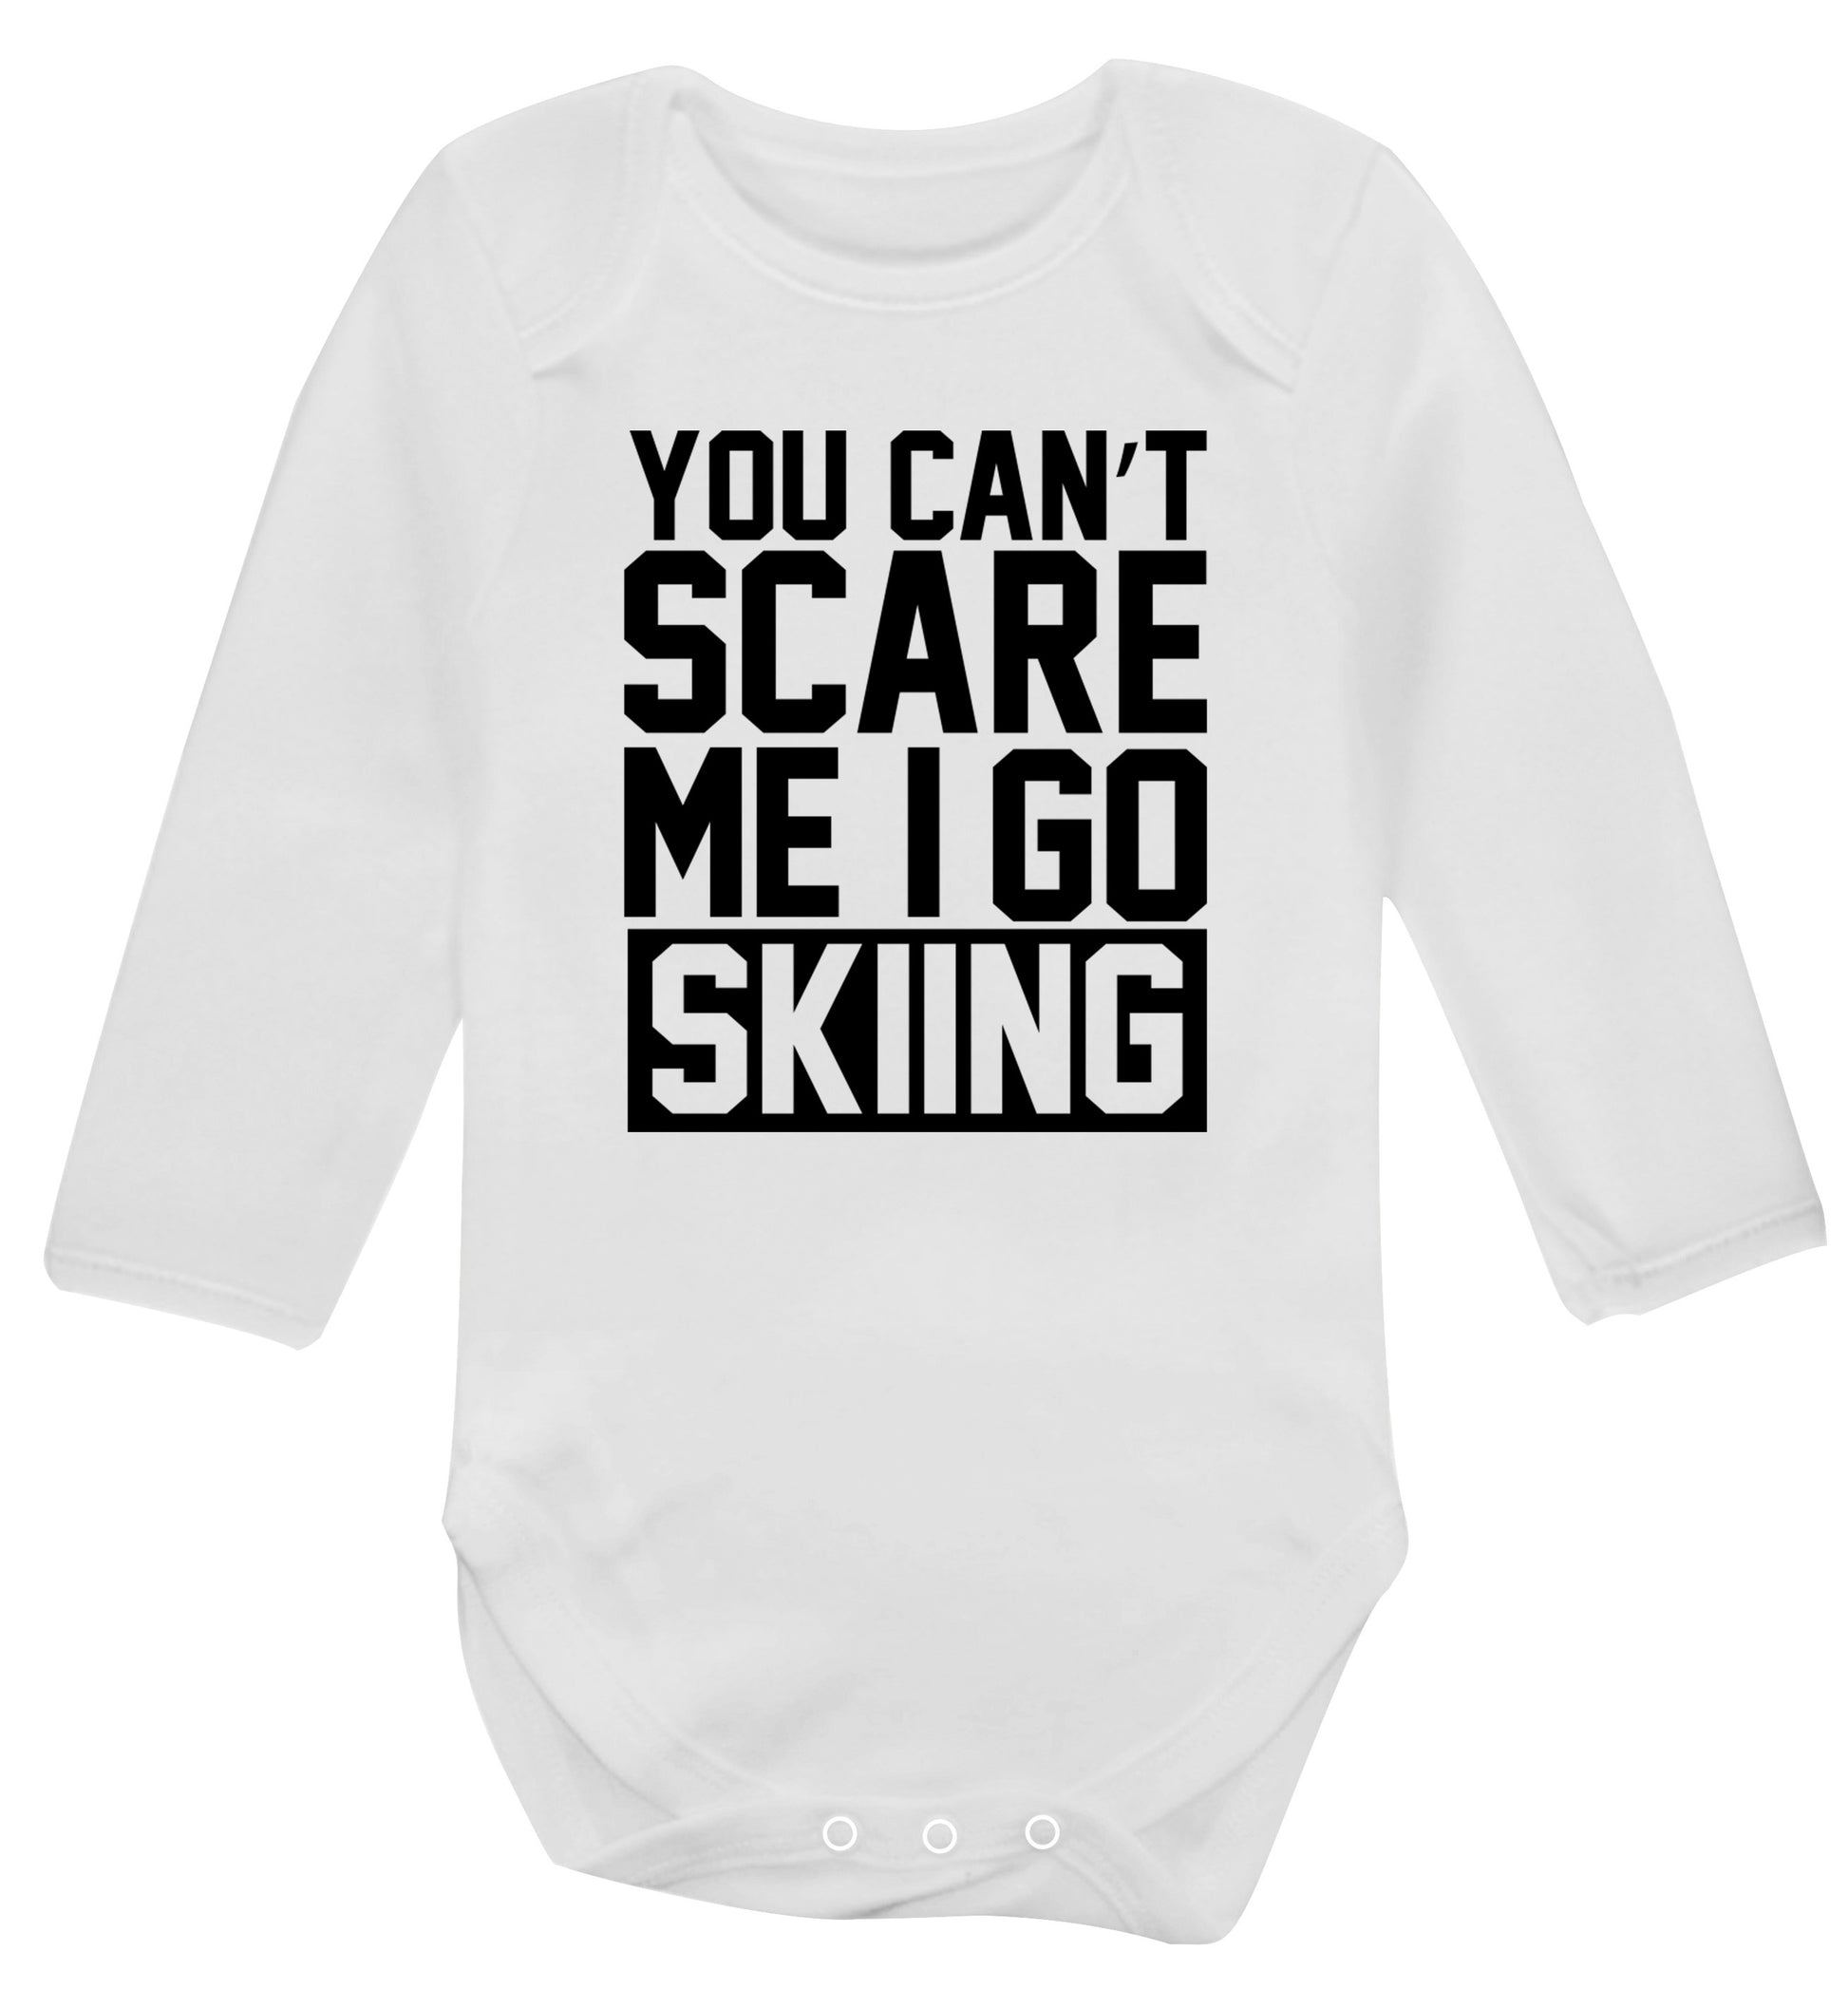 You can't scare me I go skiing Baby Vest long sleeved white 6-12 months